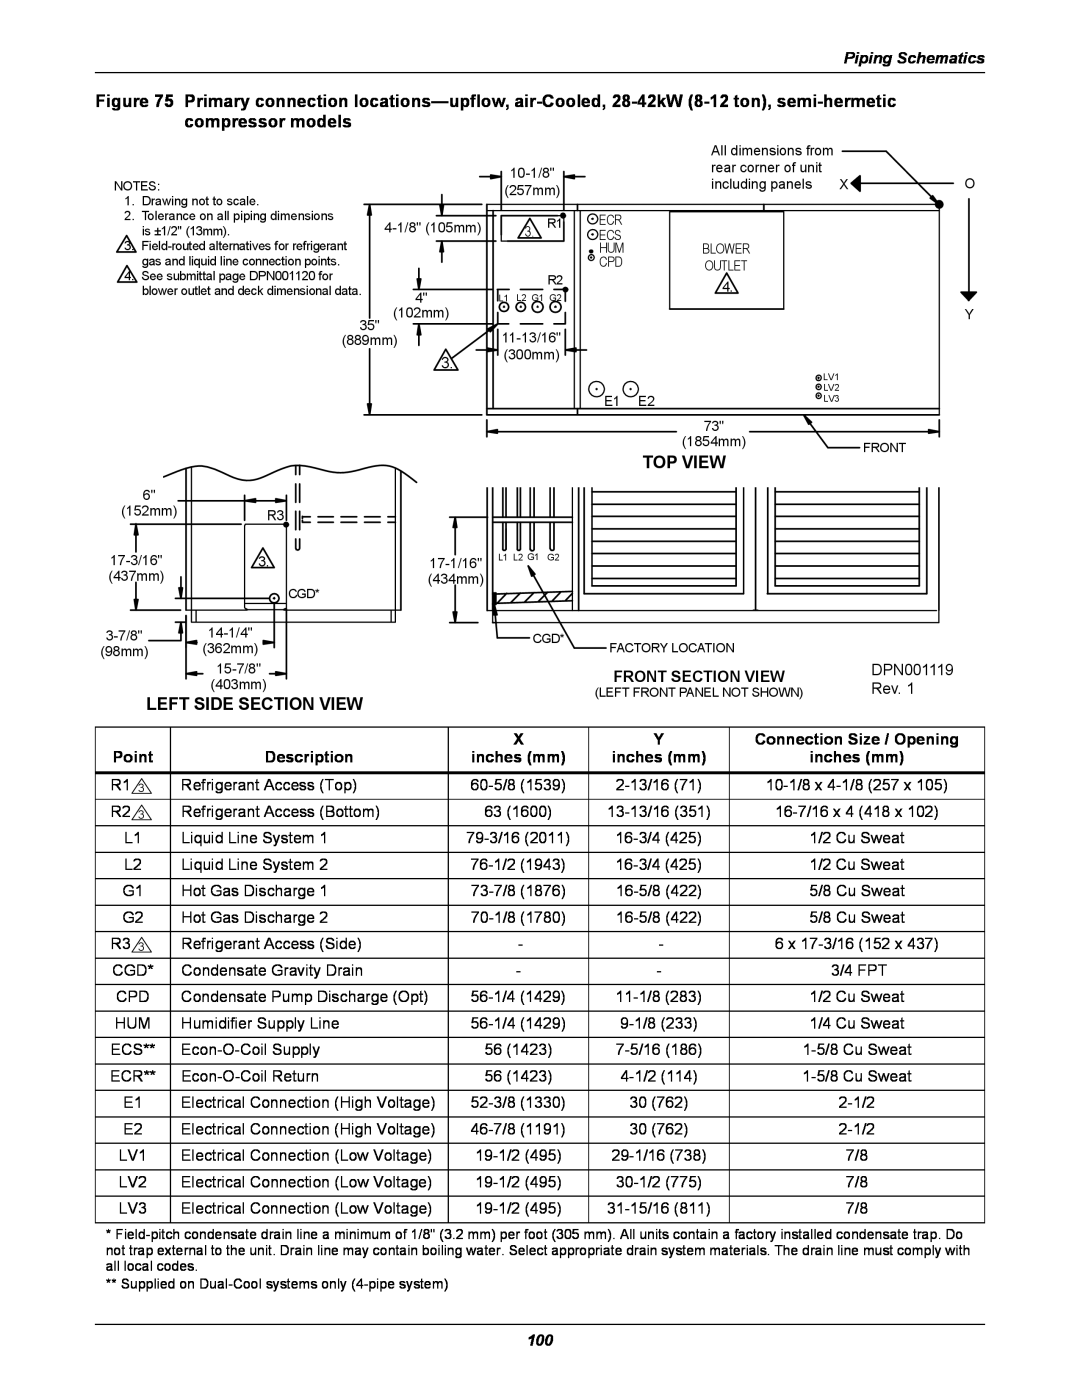 Liebert DS user manual Piping Schematics, Front Section View, Connection Size / Opening, Point, Description, inches mm 